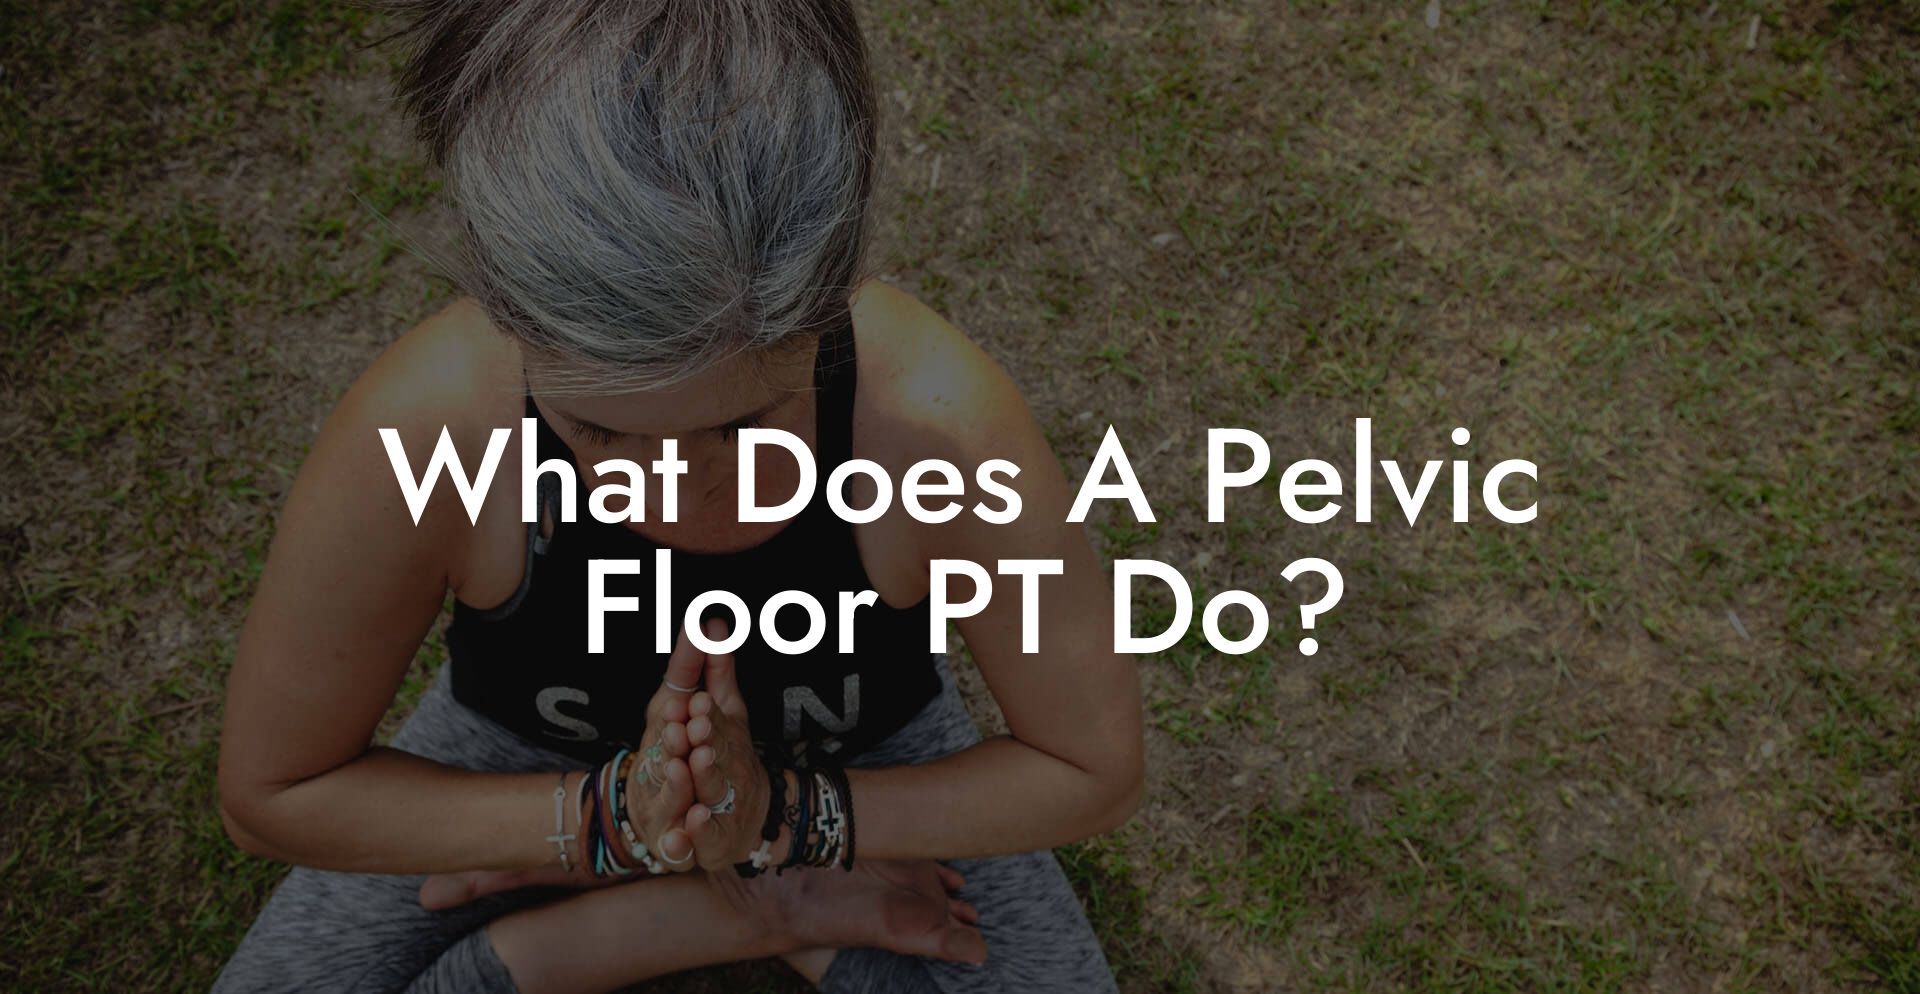 What Does A Pelvic Floor PT Do?